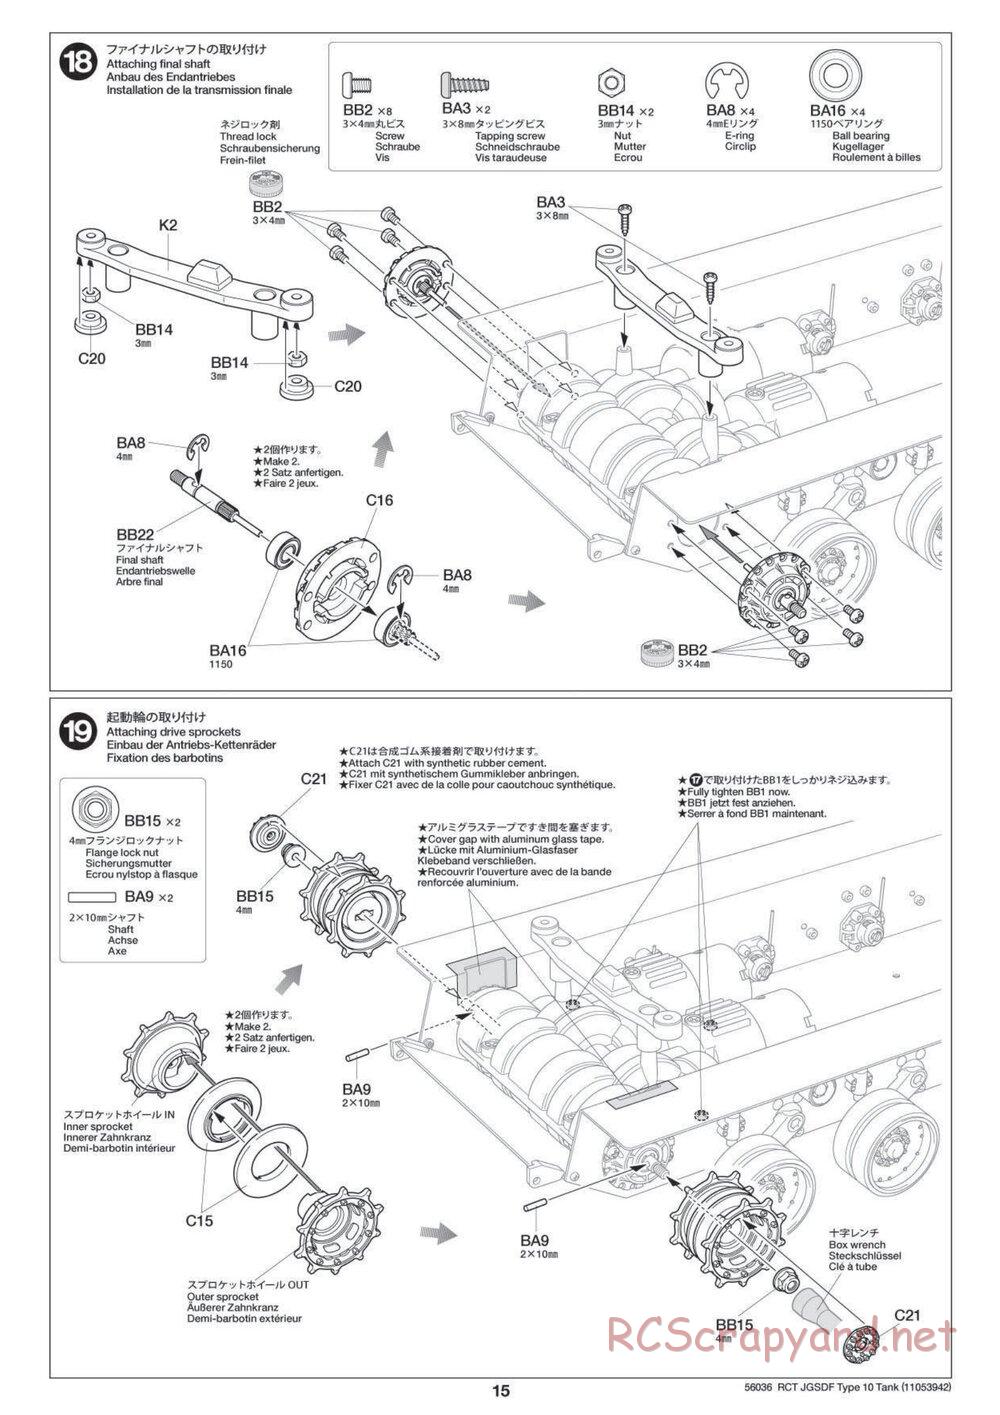 Tamiya - JGSDF Type 10 Tank - 1/16 Scale Chassis - Manual - Page 15